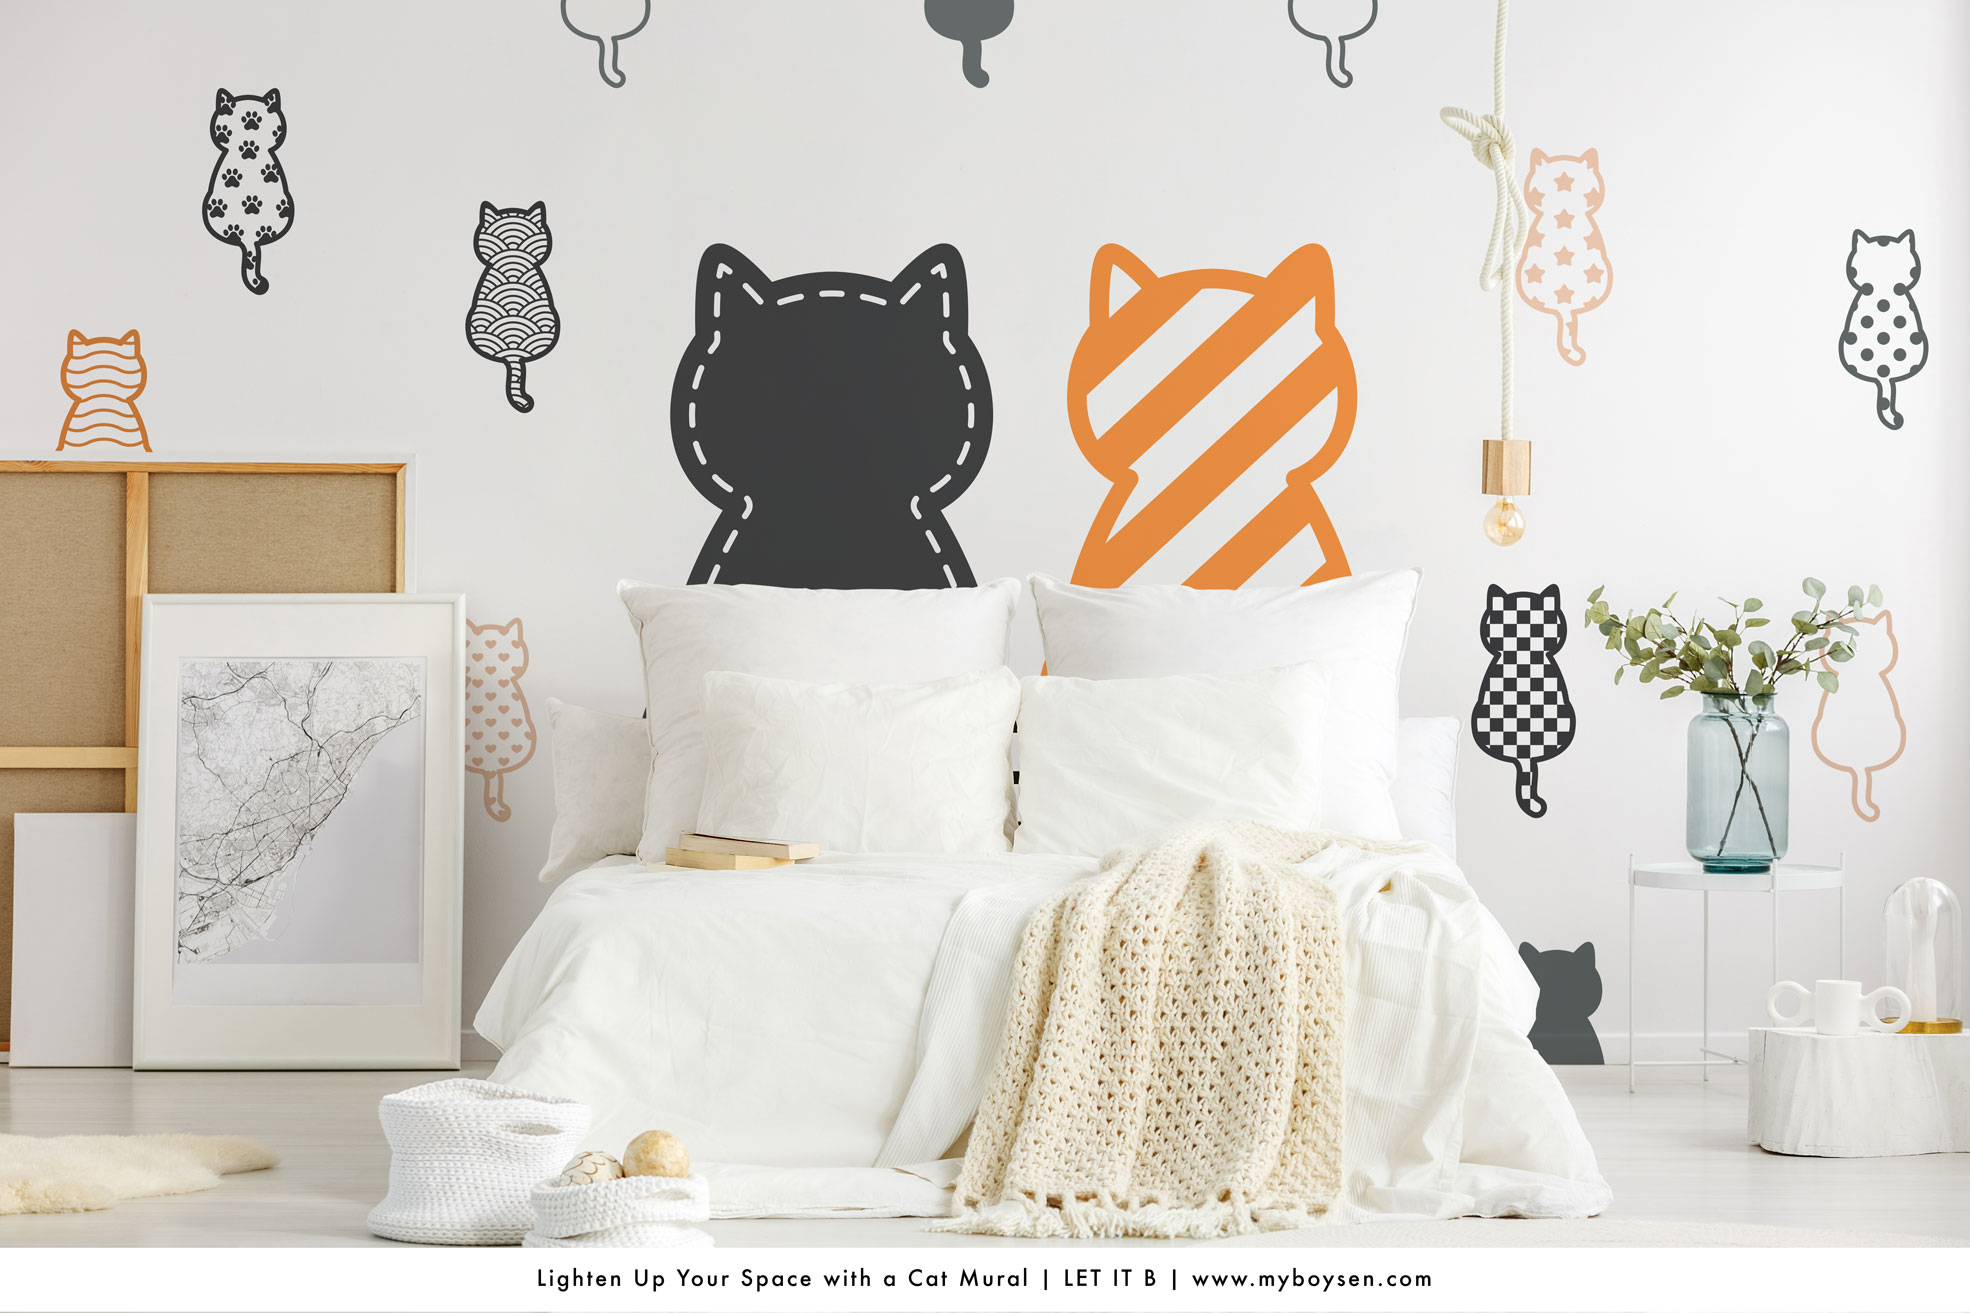 Lighten Up Your Space with a Cat Mural | MyBoysen